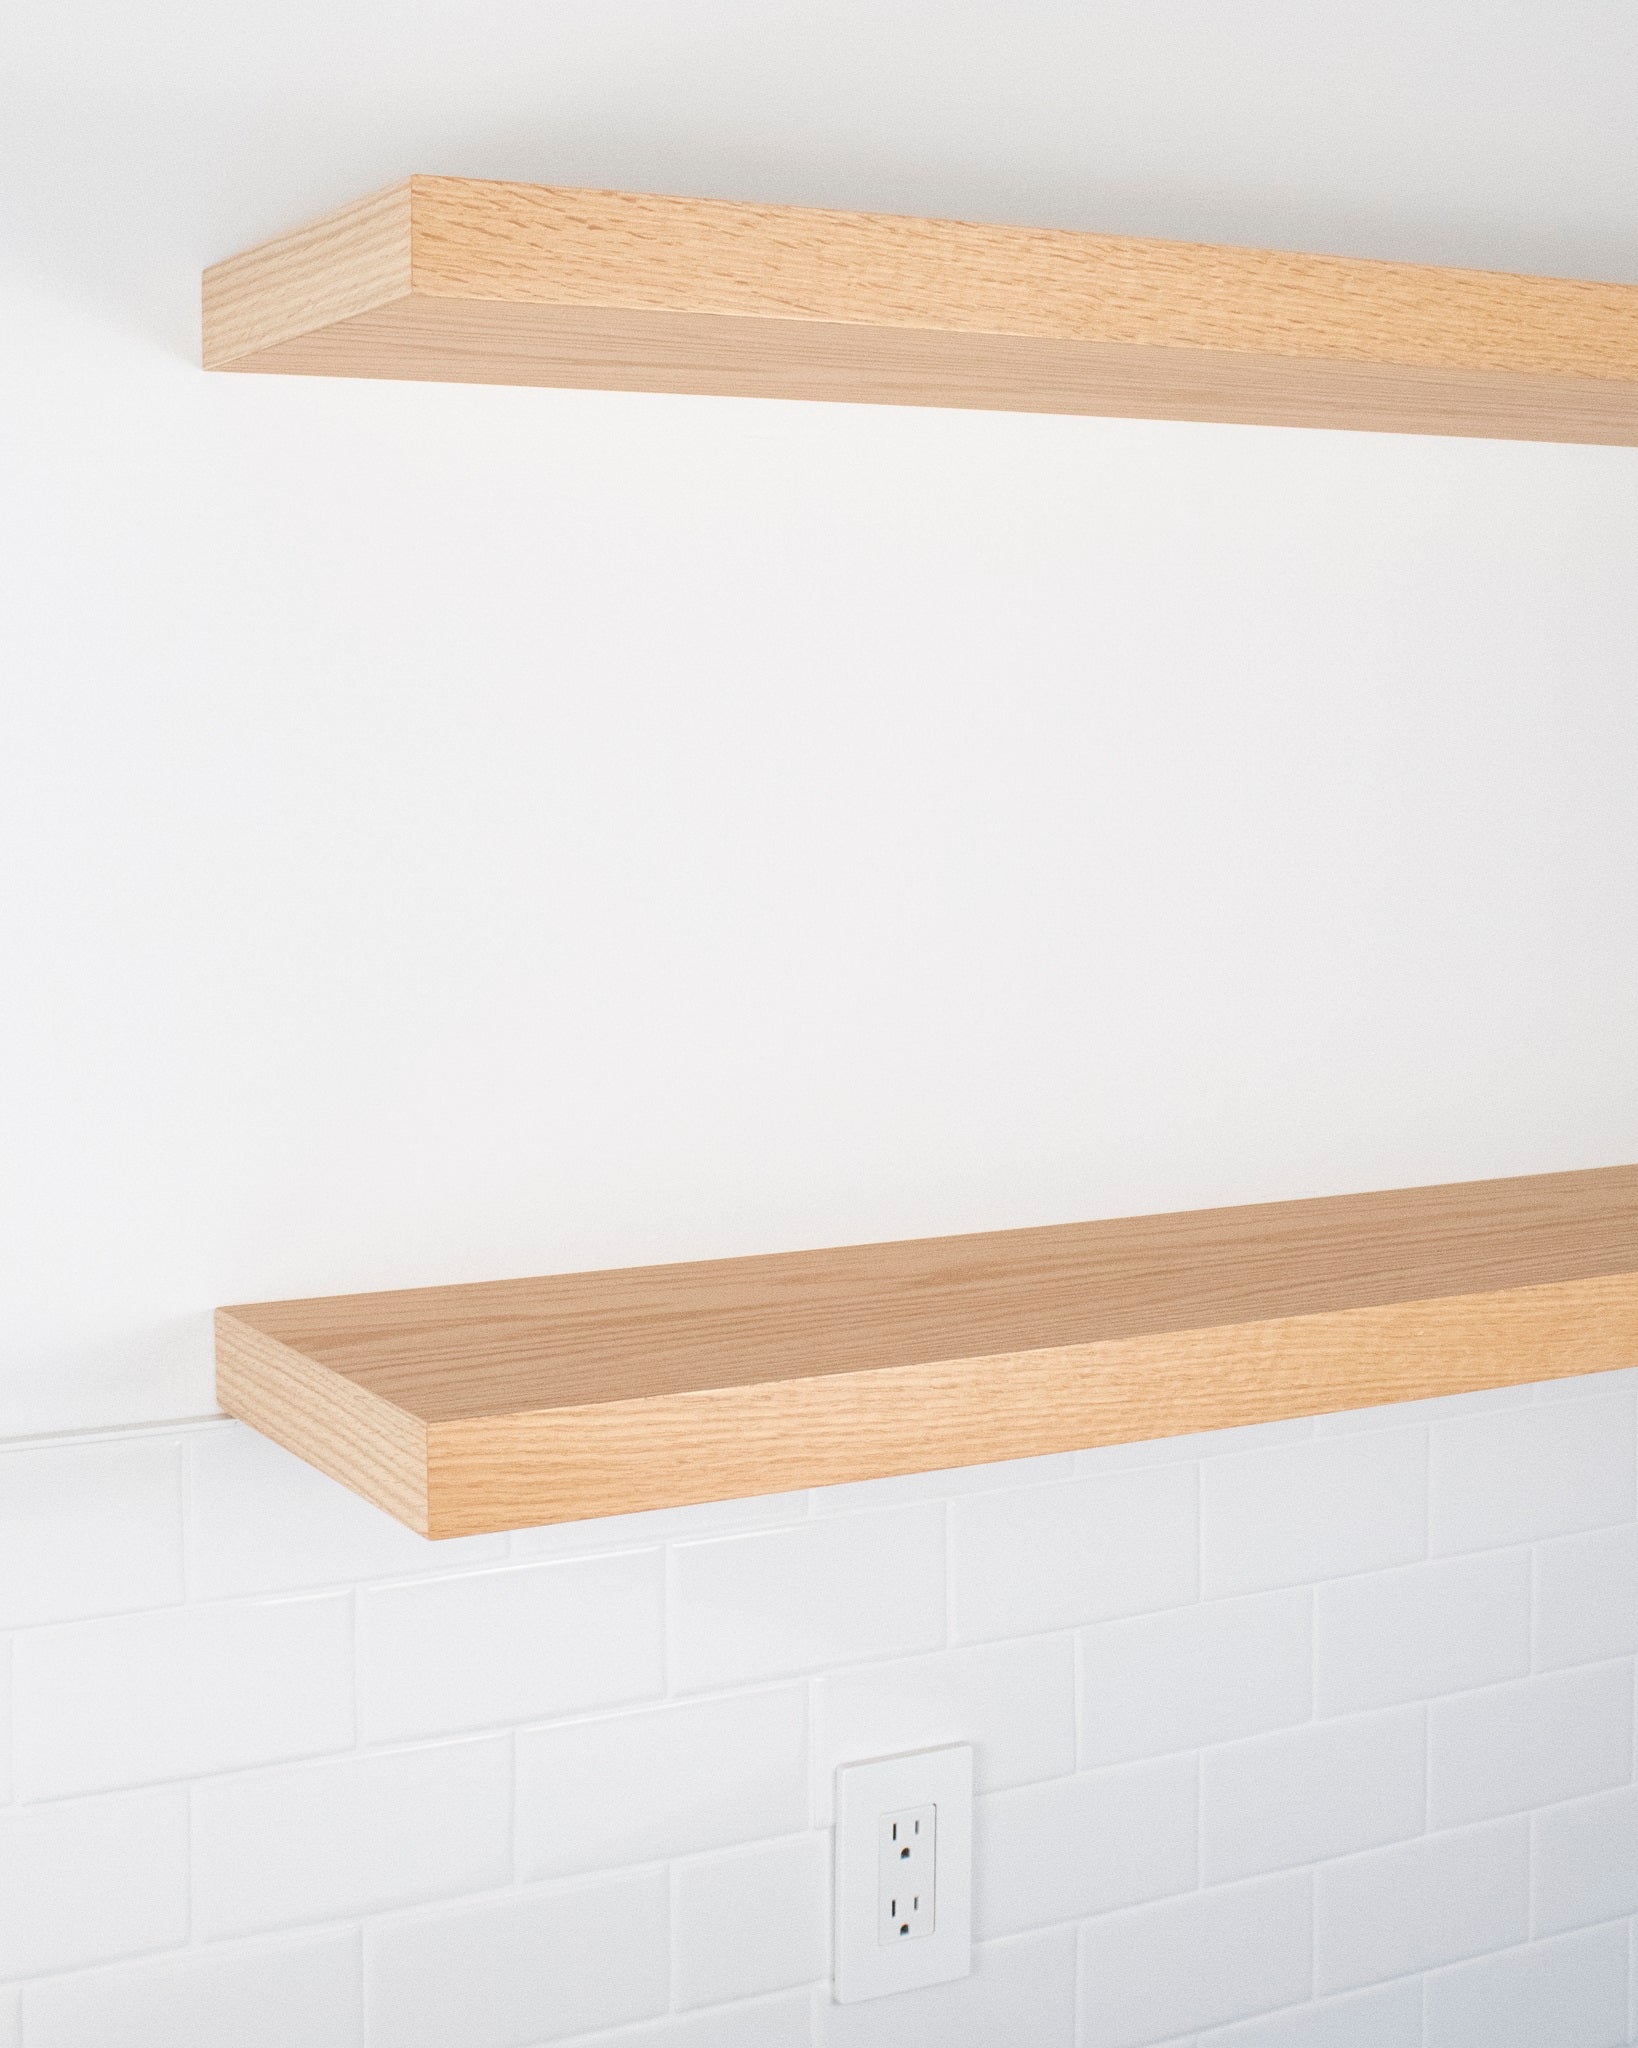 Red Oak Floating Shelves 1.75" thick